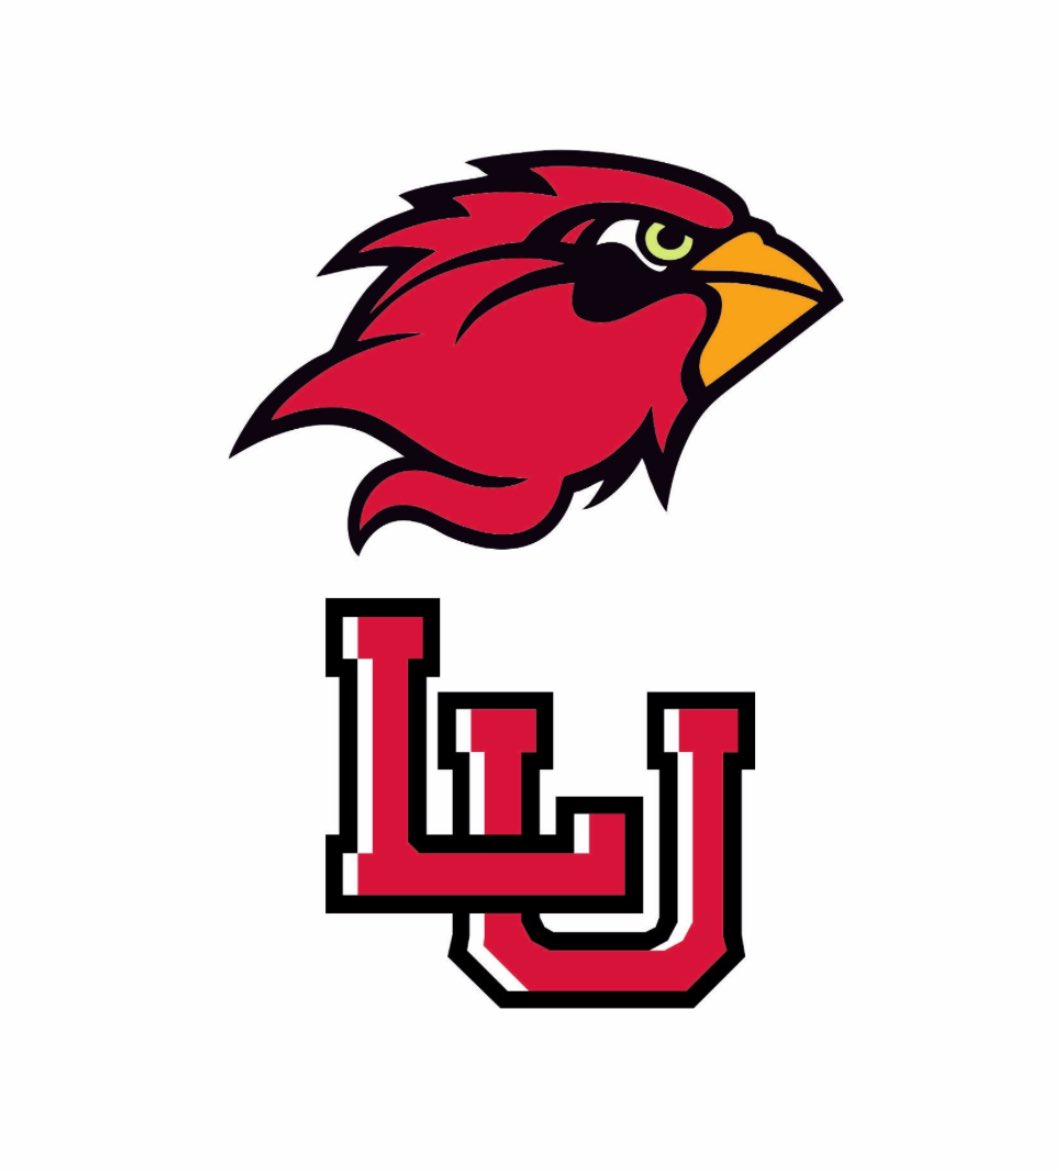 #AGTG after a great conversation with @Coach_Cannata I’m blessed to receive a PWO opportunity to play D1 football from @LamarFootball!